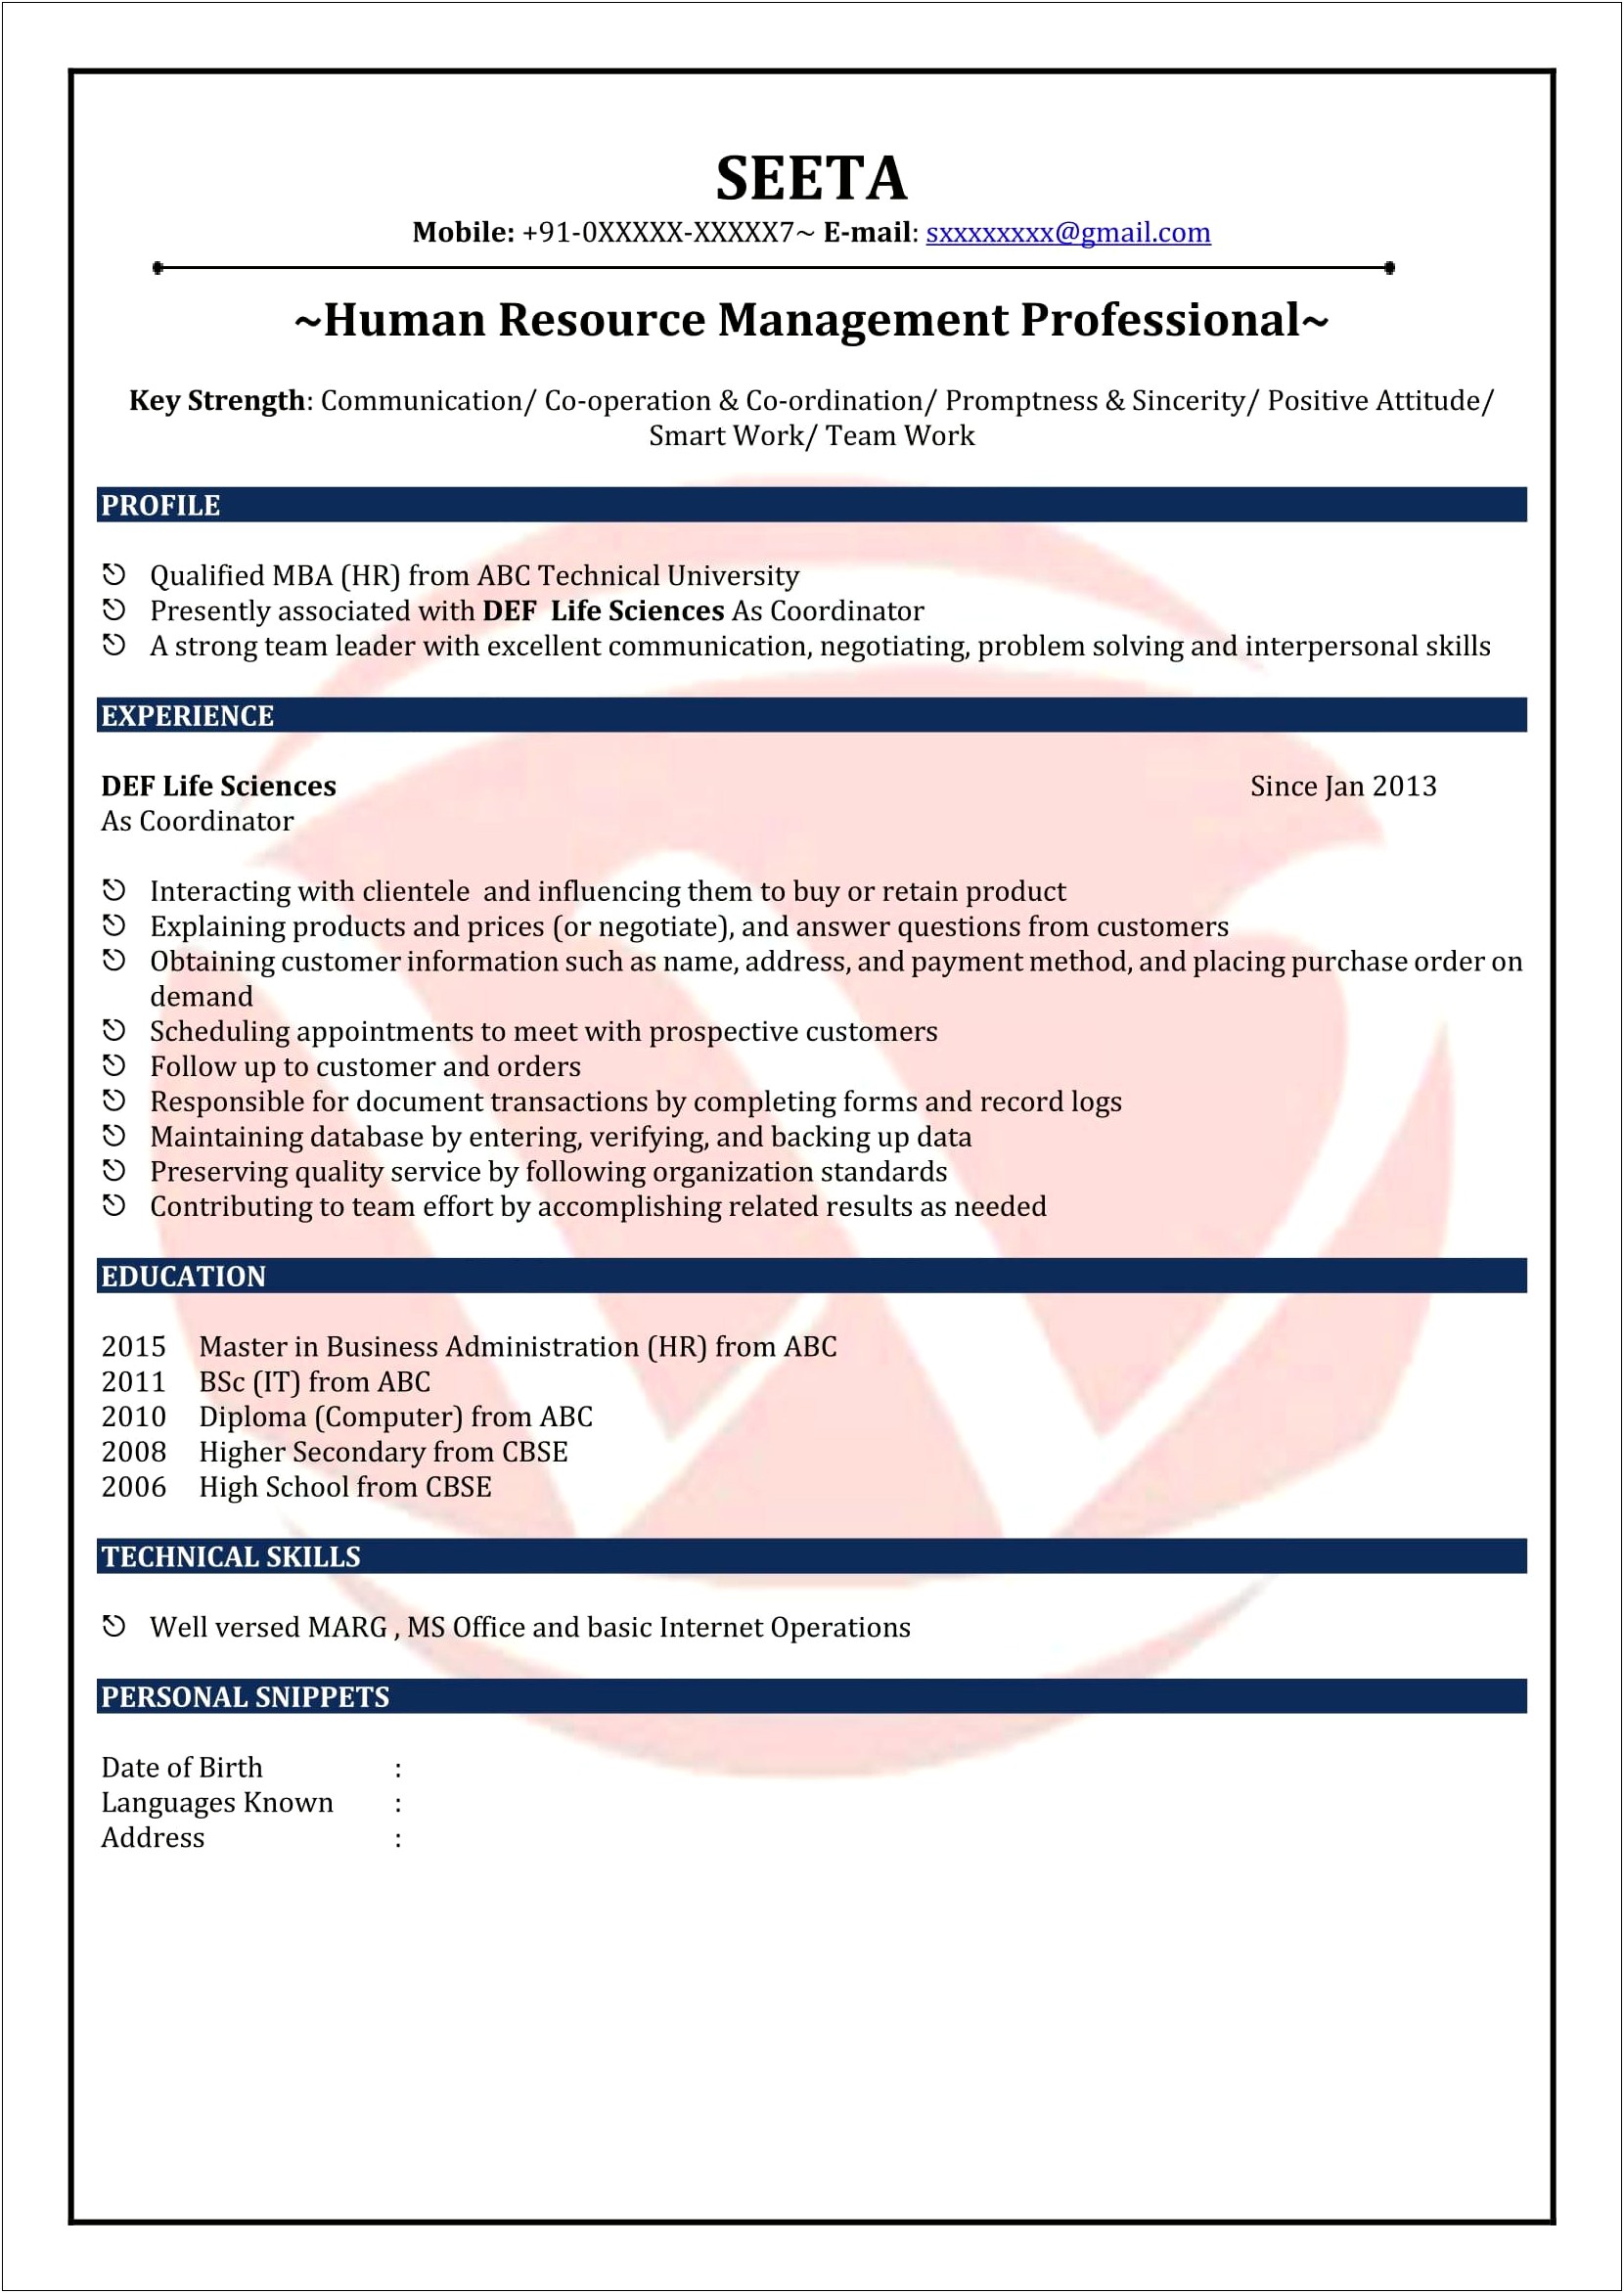 Hr Executive Resume Templates Free Download